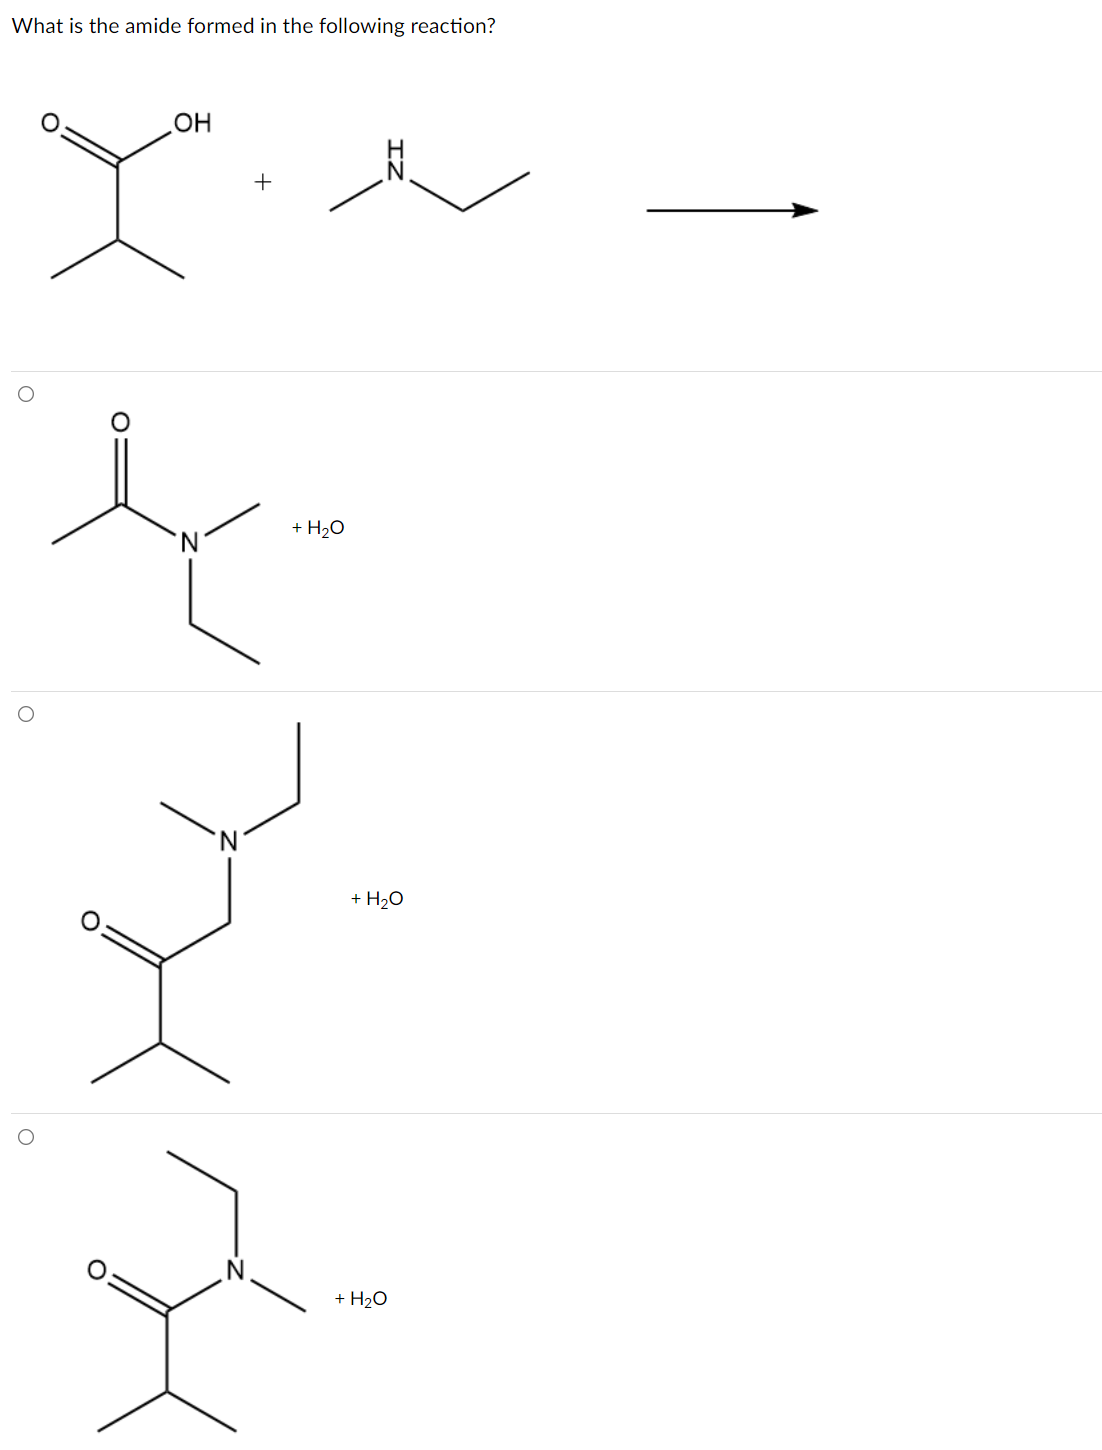 What is the amide formed in the following reaction?
OH
+
+ H2O
+ H2O
+ H2O
